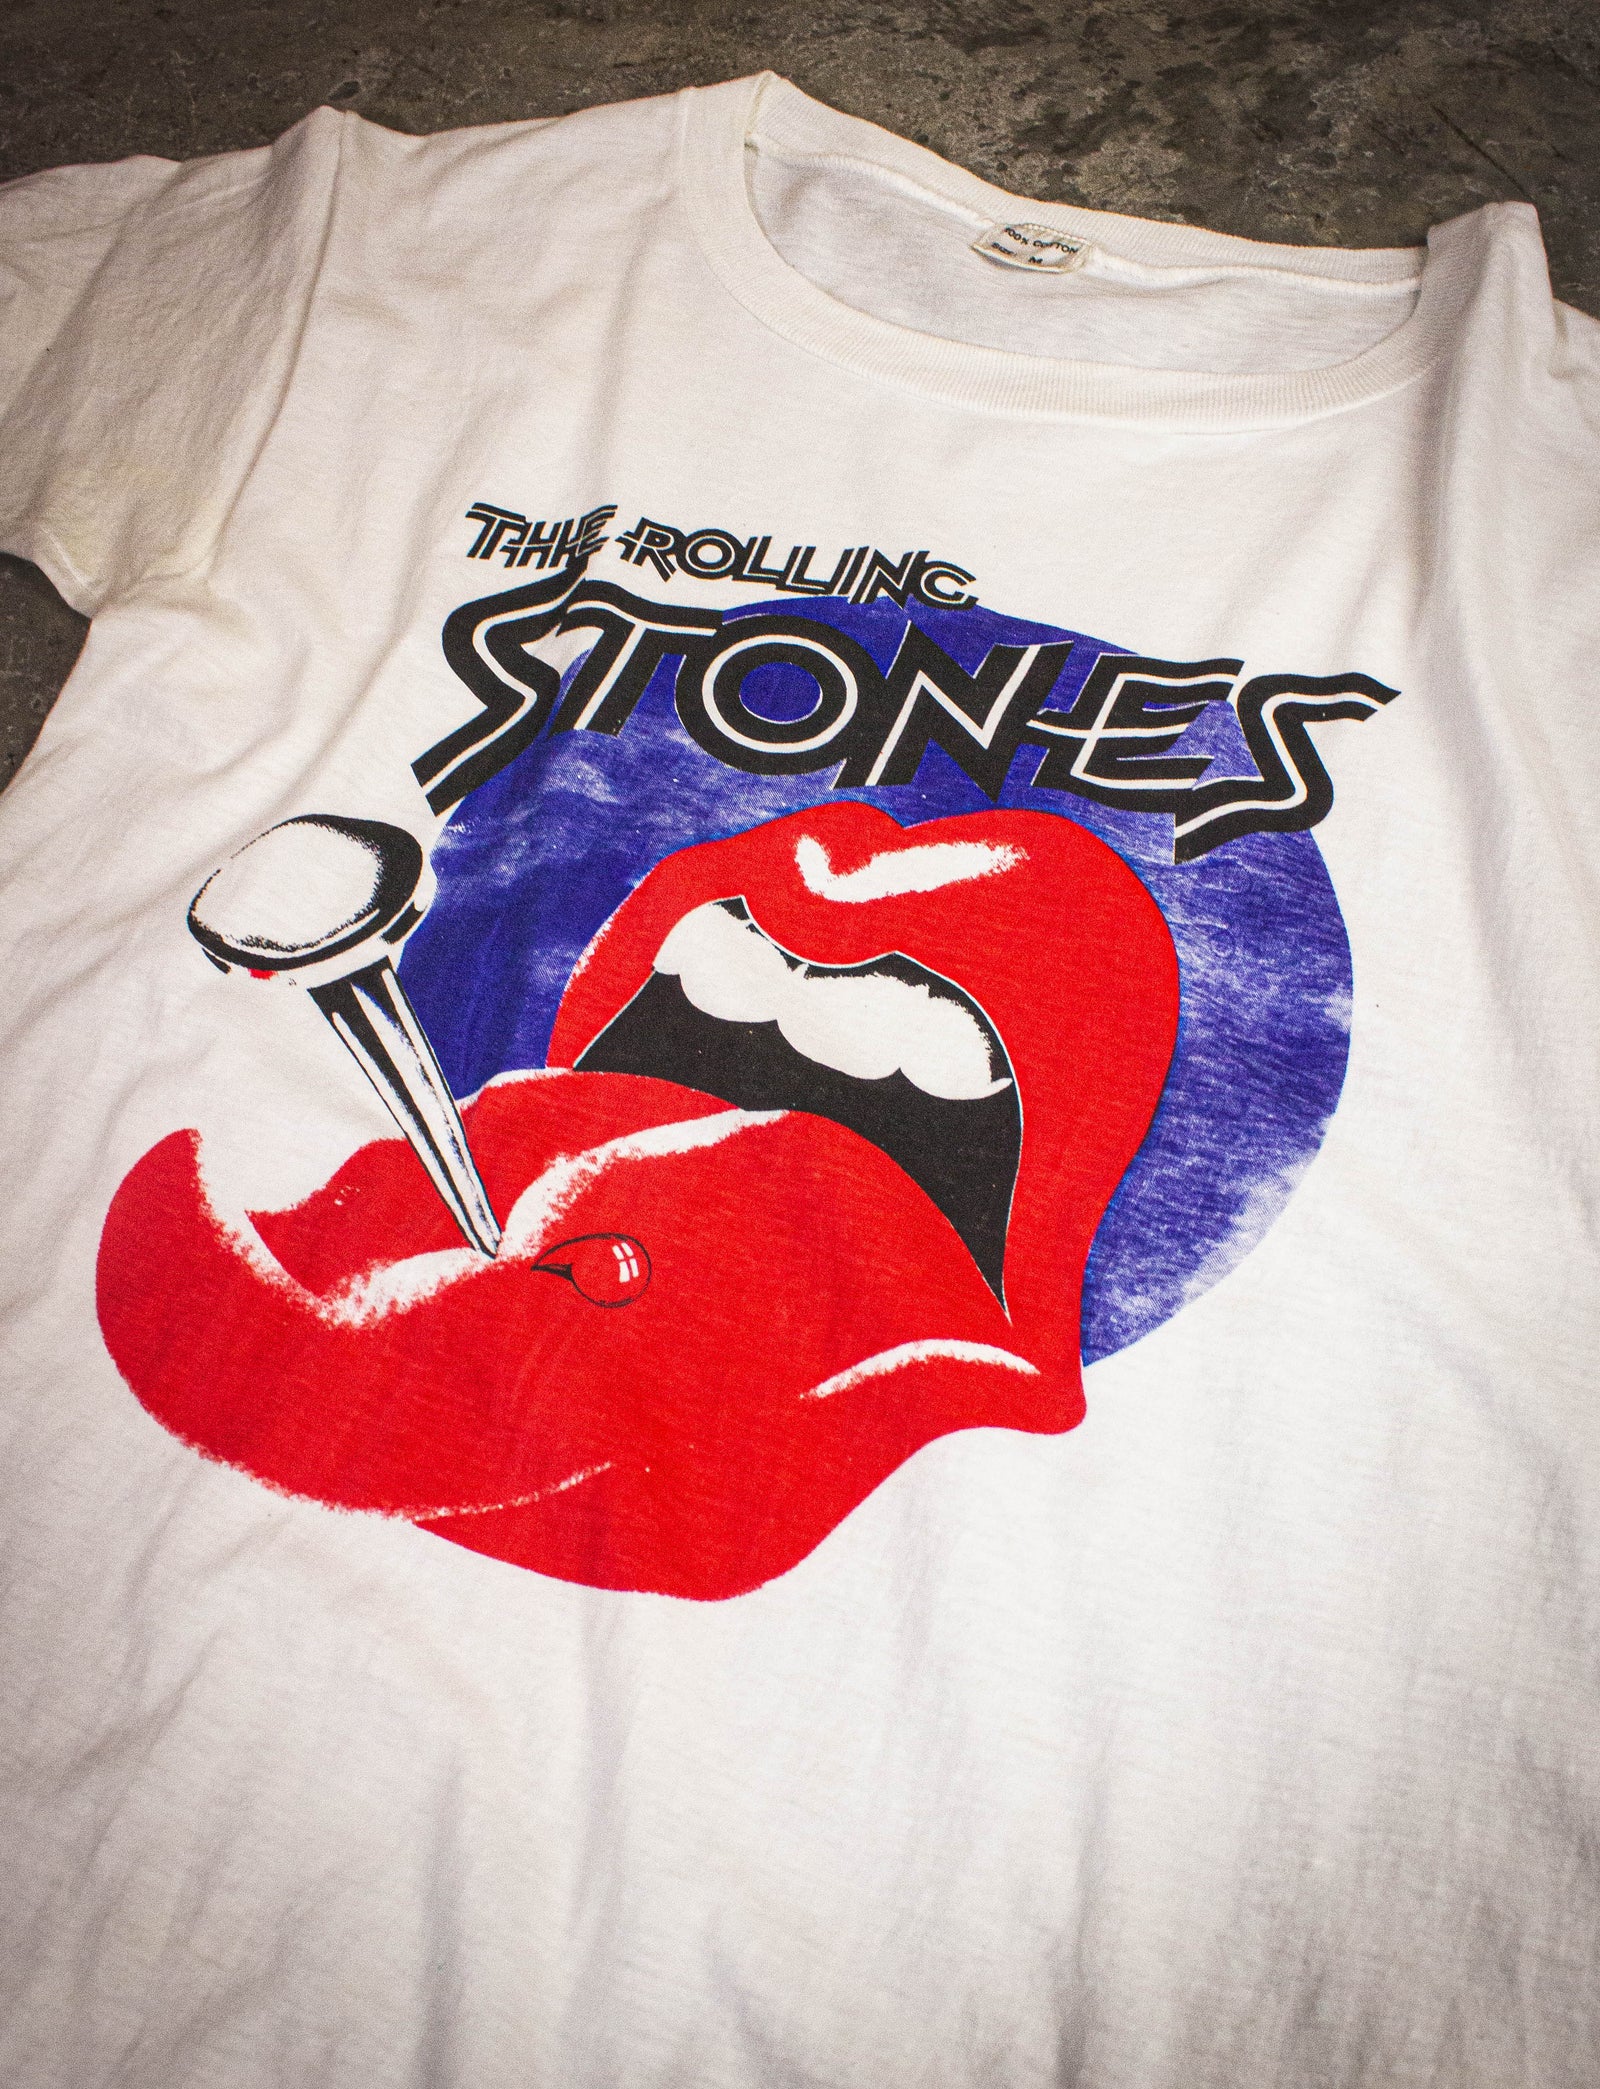 Vintage Rolling Stones Tongue Tack Concert T Shirt 70s White Small